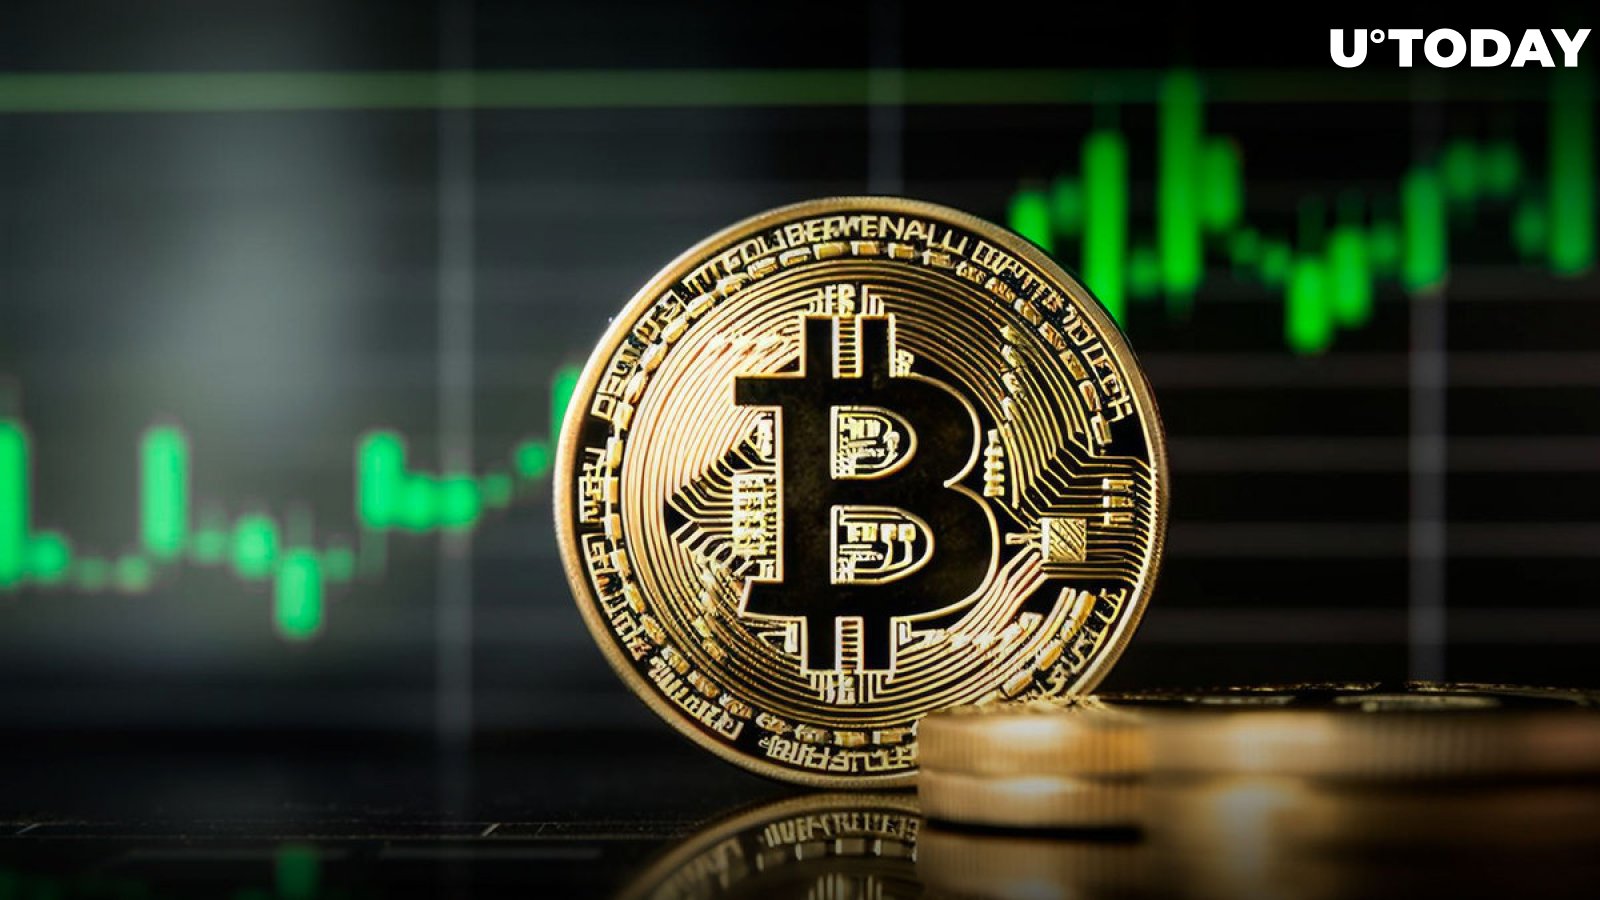 Bitcoin (BTC) Price Just Soared to $65,000, Will ATH Emerge Soon?